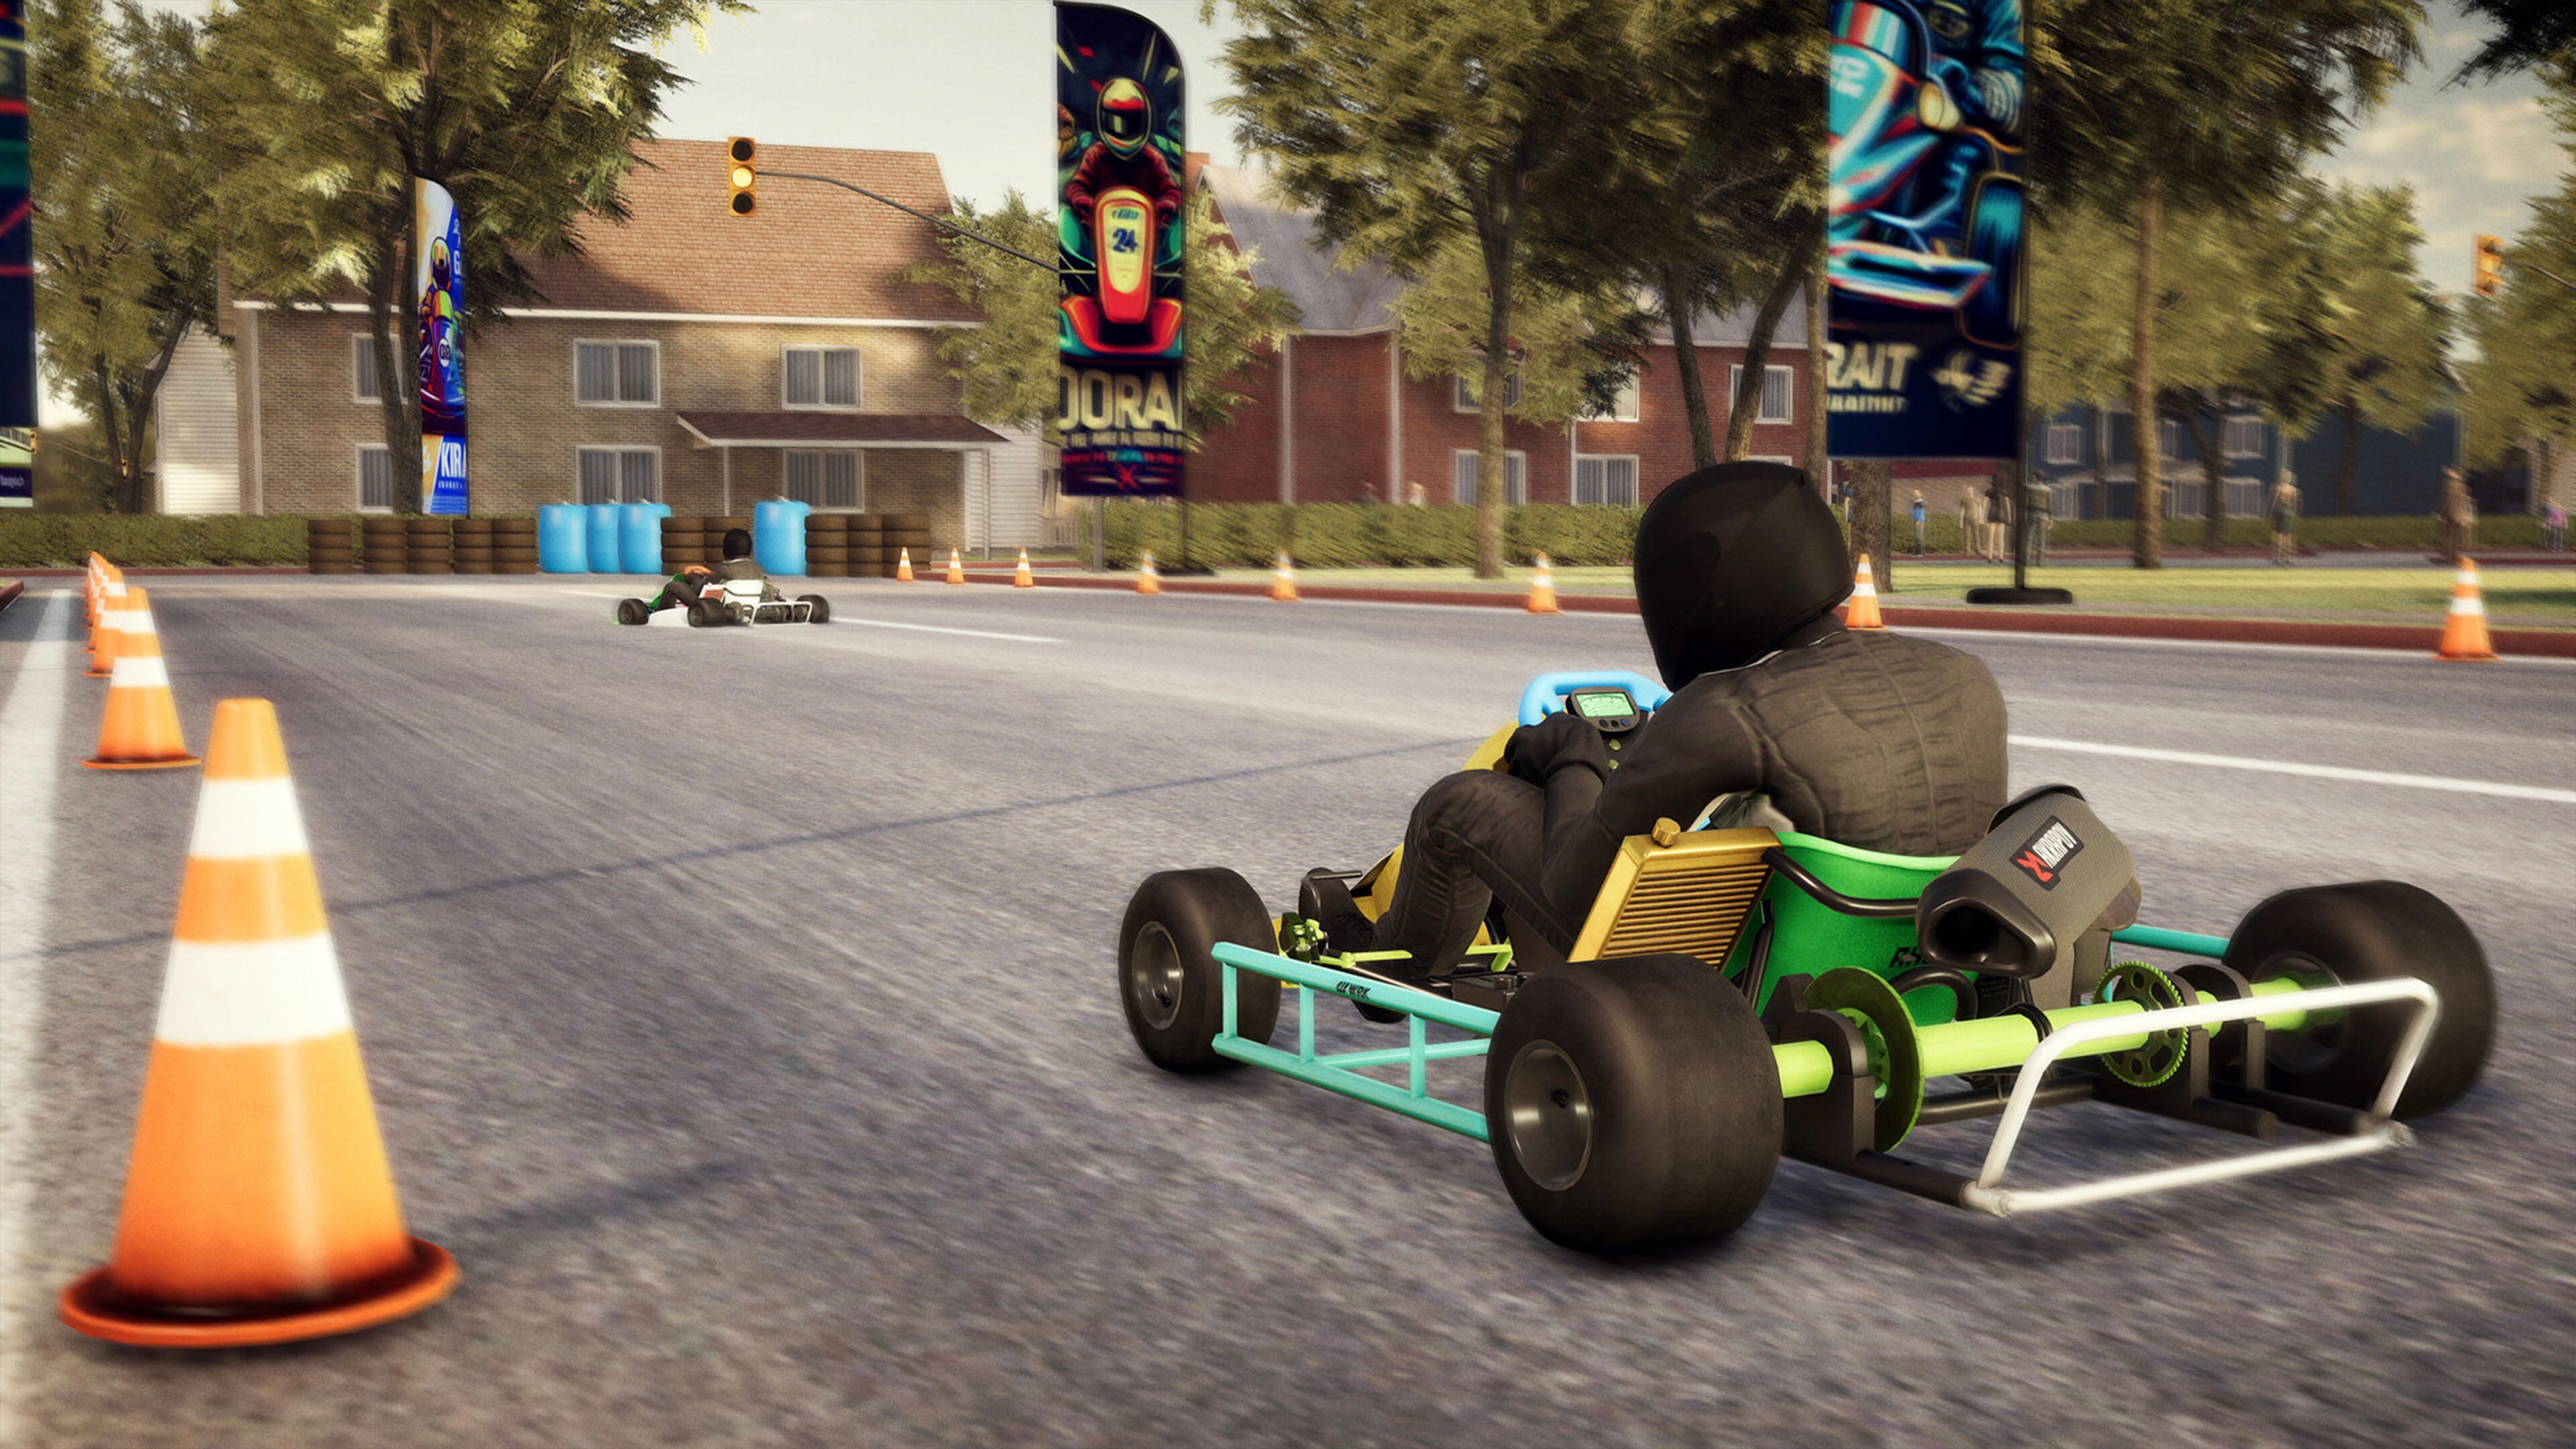 We're making a simcade karting game, animations for the kart and driver are  done! Can't wait to share gameplay. Do or did many of you here do karting?  What's something you'd be